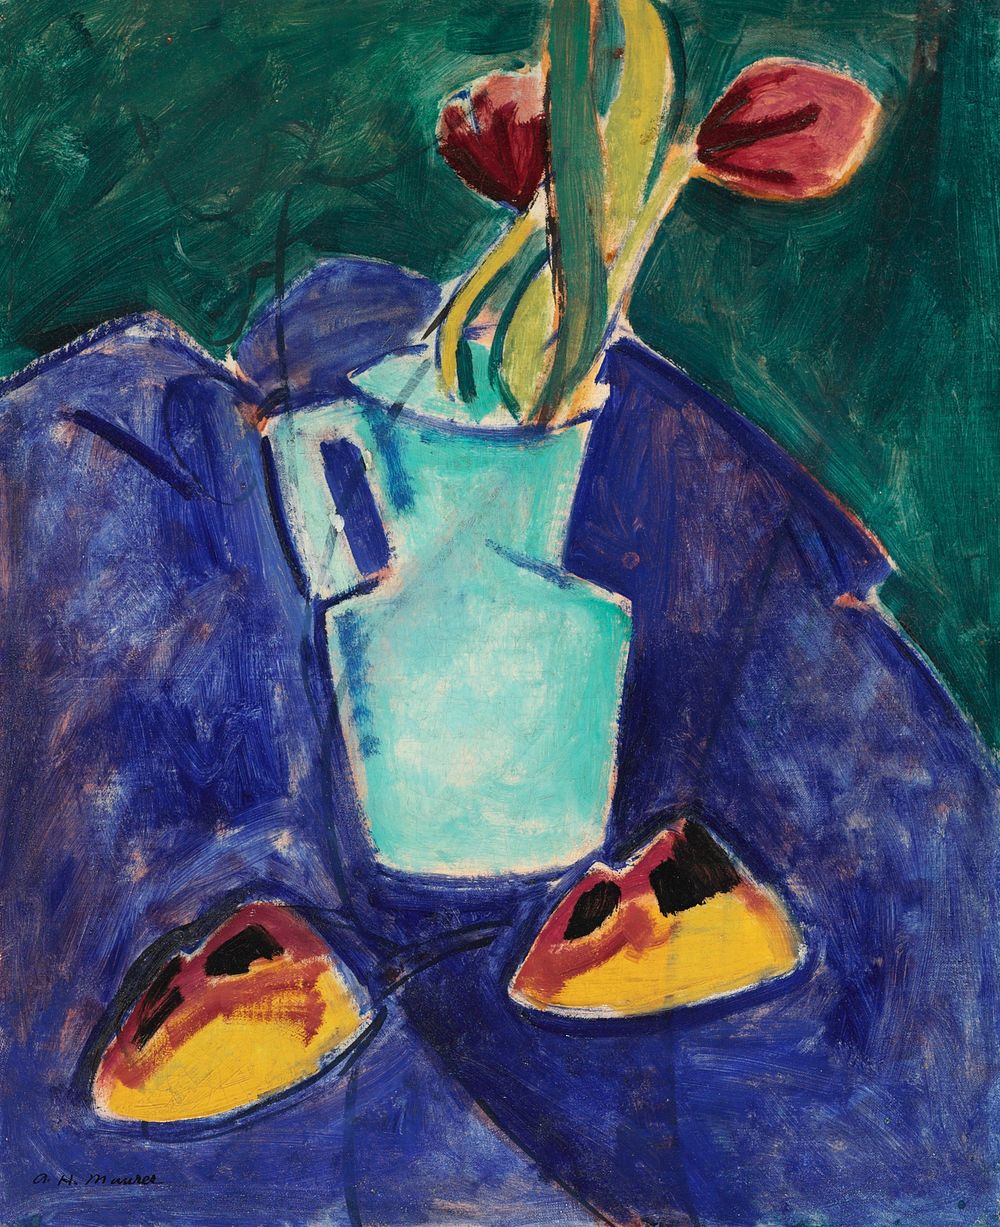 Tulips in a Green Vase by Alfred Henry Maurer